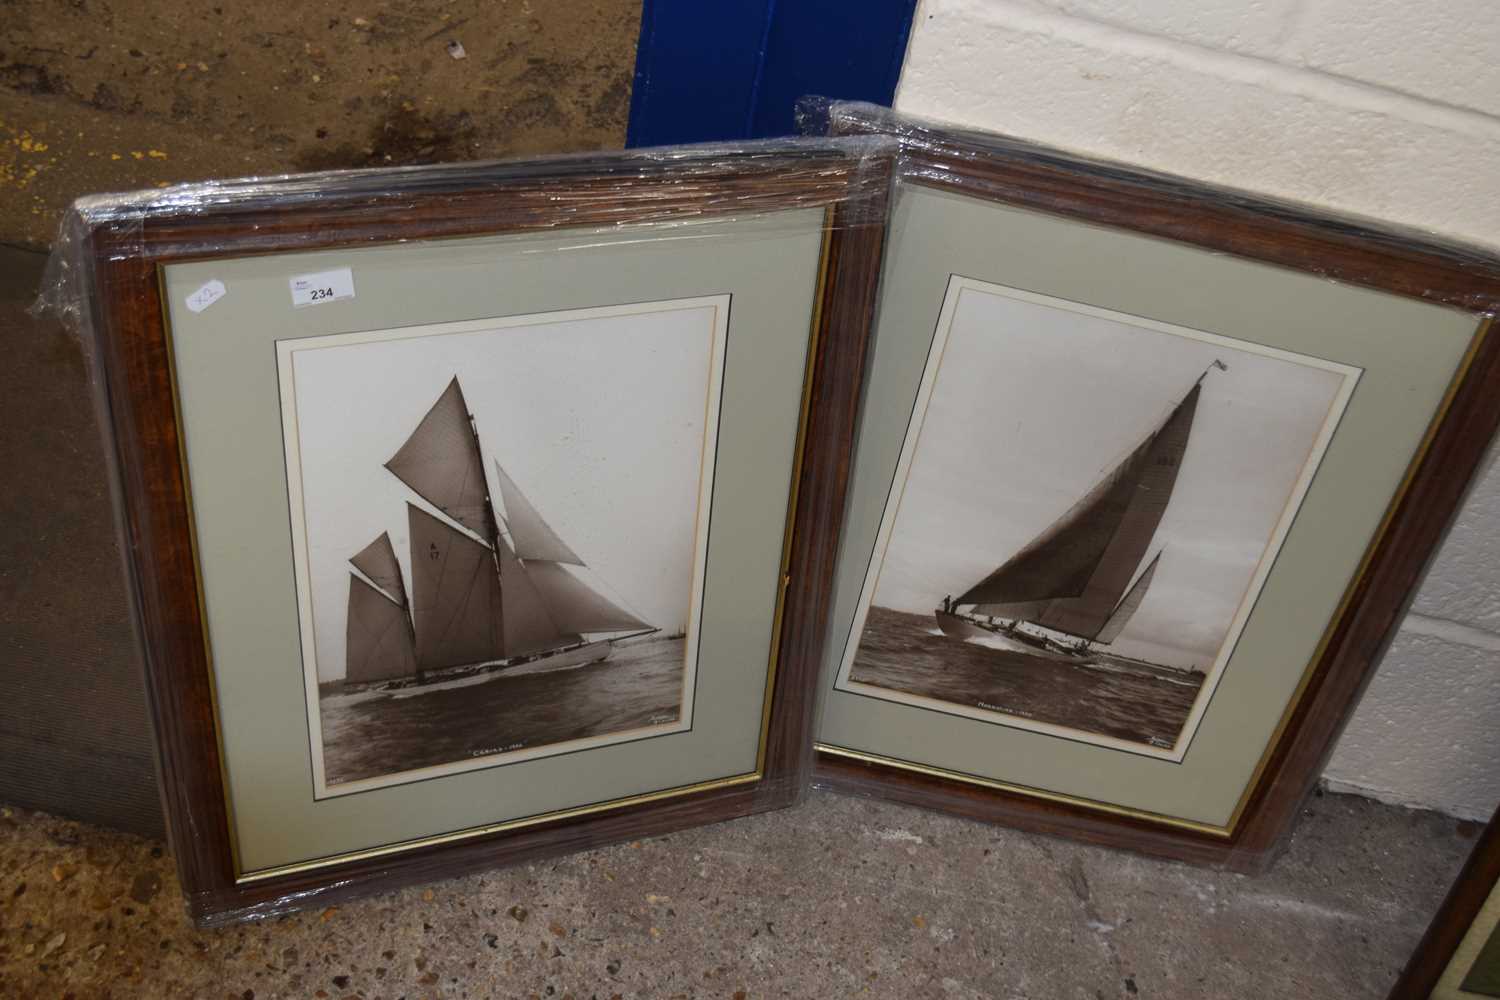 Pair of photographic prints of a yacht marked Beken of Cowes